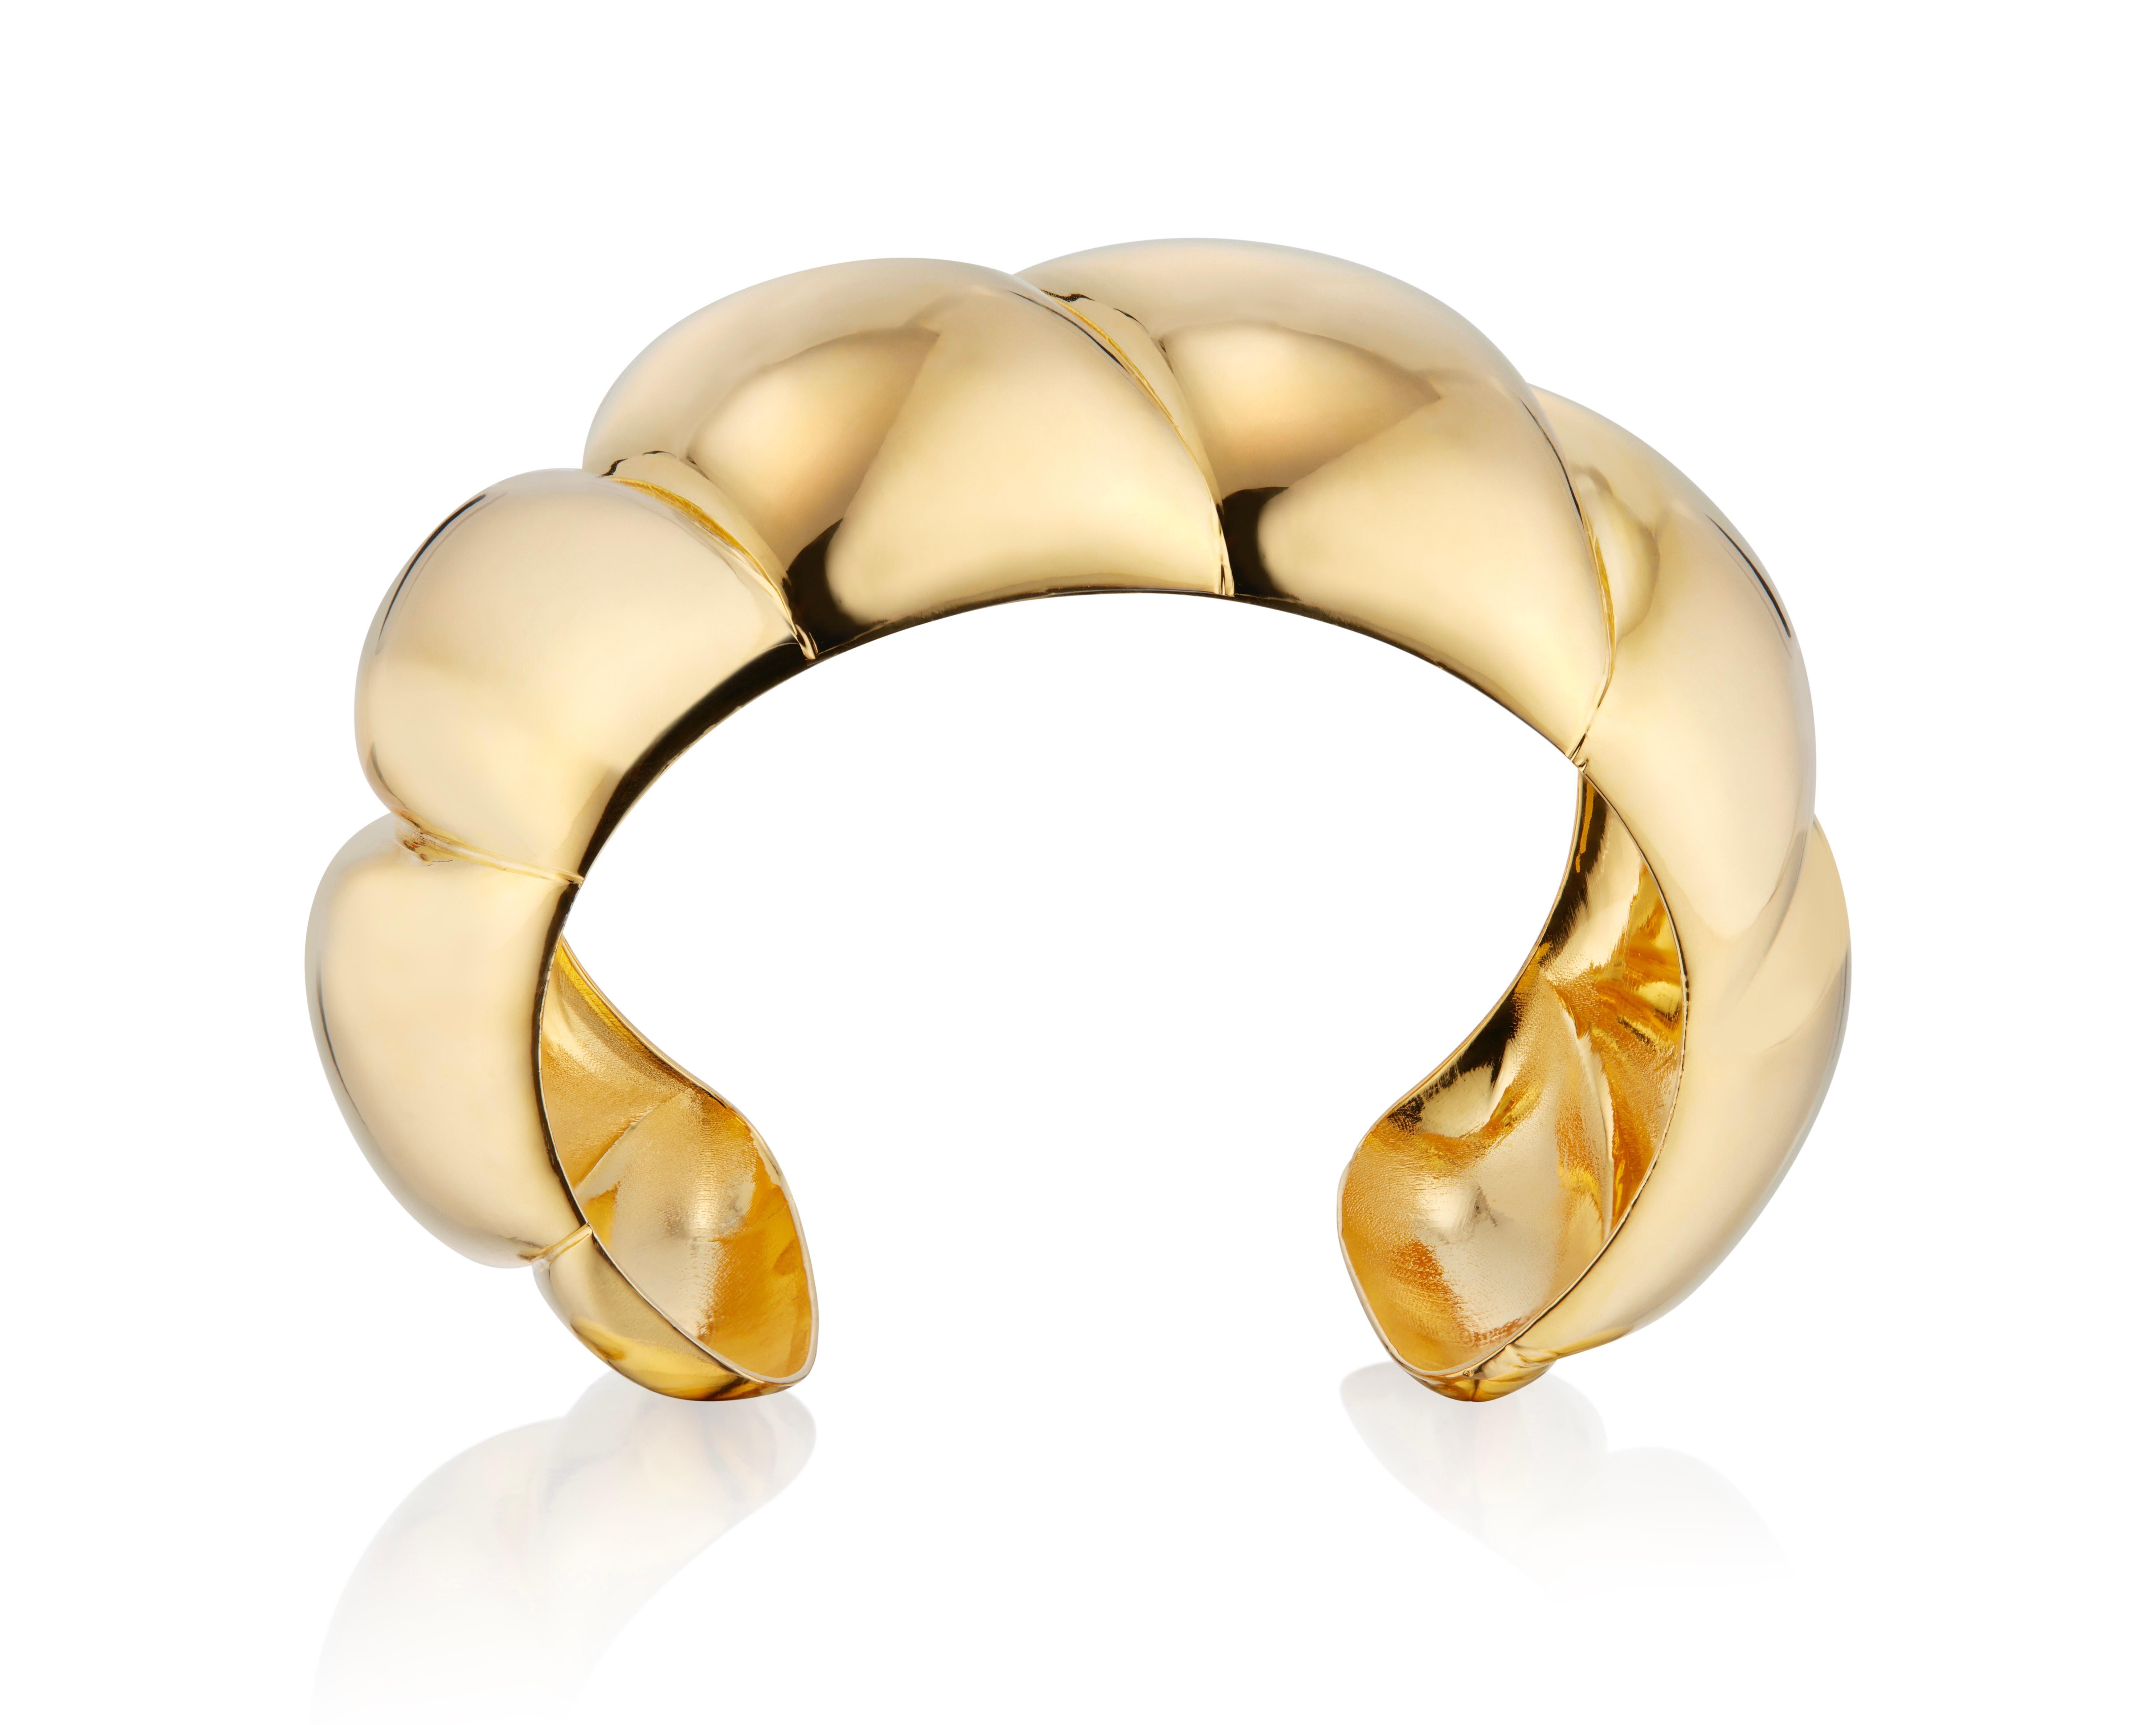 This regal  Shrimp Cuff is a classic design for the modern jewelry enthusiast who appreciates timeless pieces with a sophisticated edge.  Wear it alone or pair it with our stunning Shrimp Ring

All items are made to order, please allow 10-15